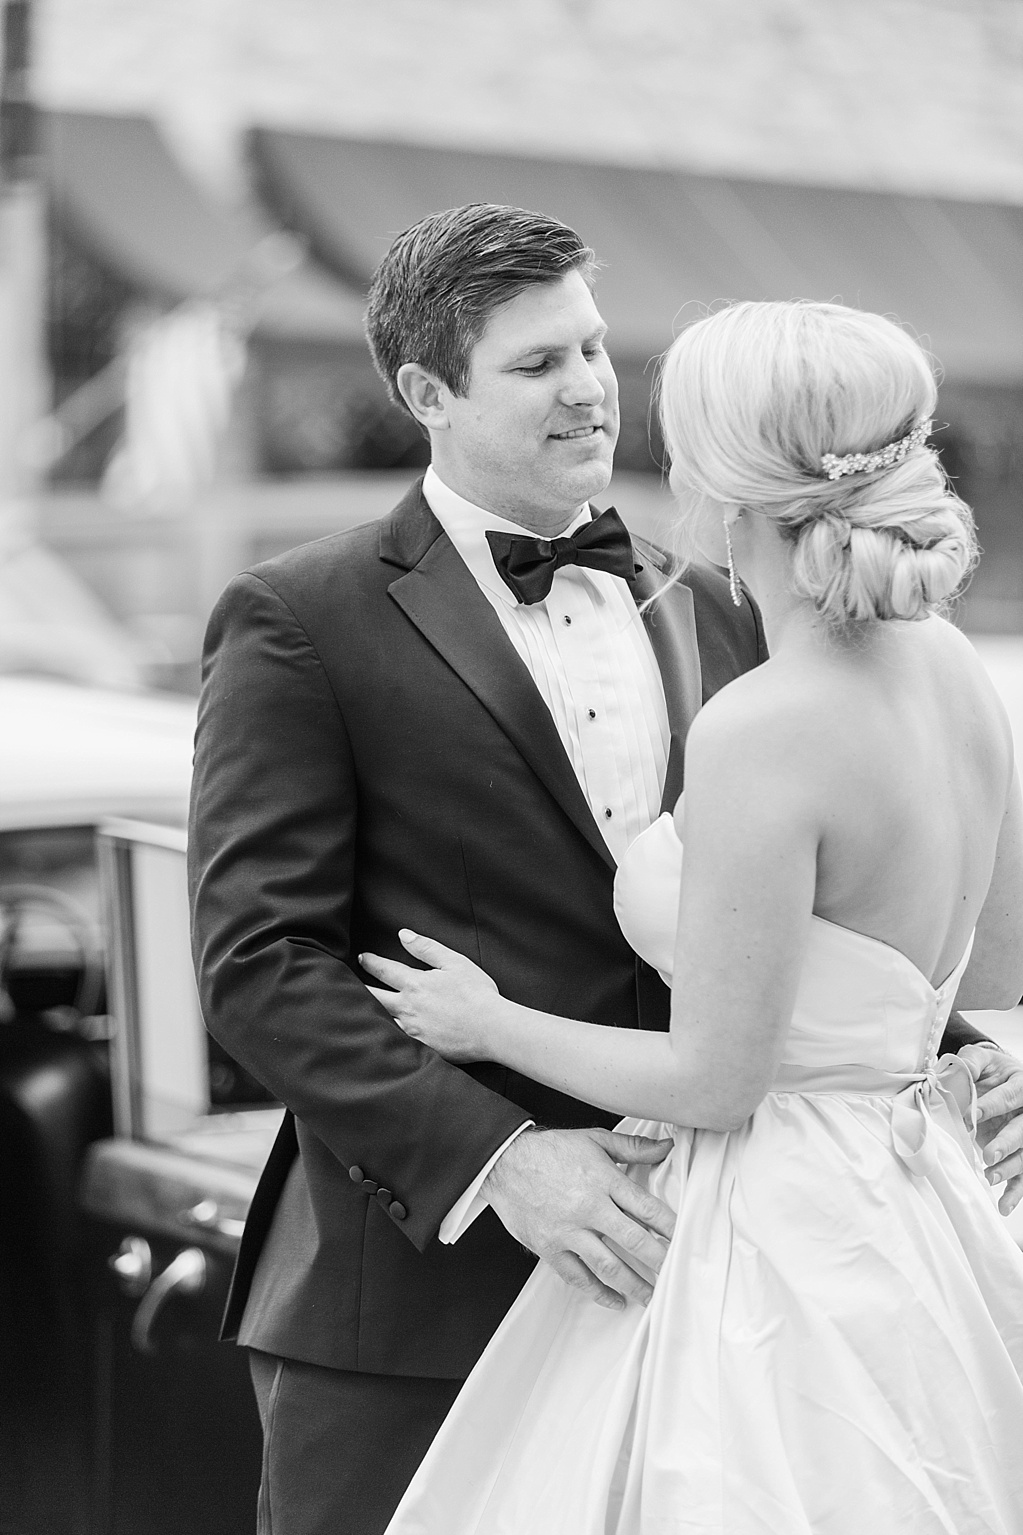 An Art Deco Black Tie Wedding at The Ingenhuett On High in Comfort Texas Featuring a Bentley Vintage Car and Blush Wedding Dress 0028